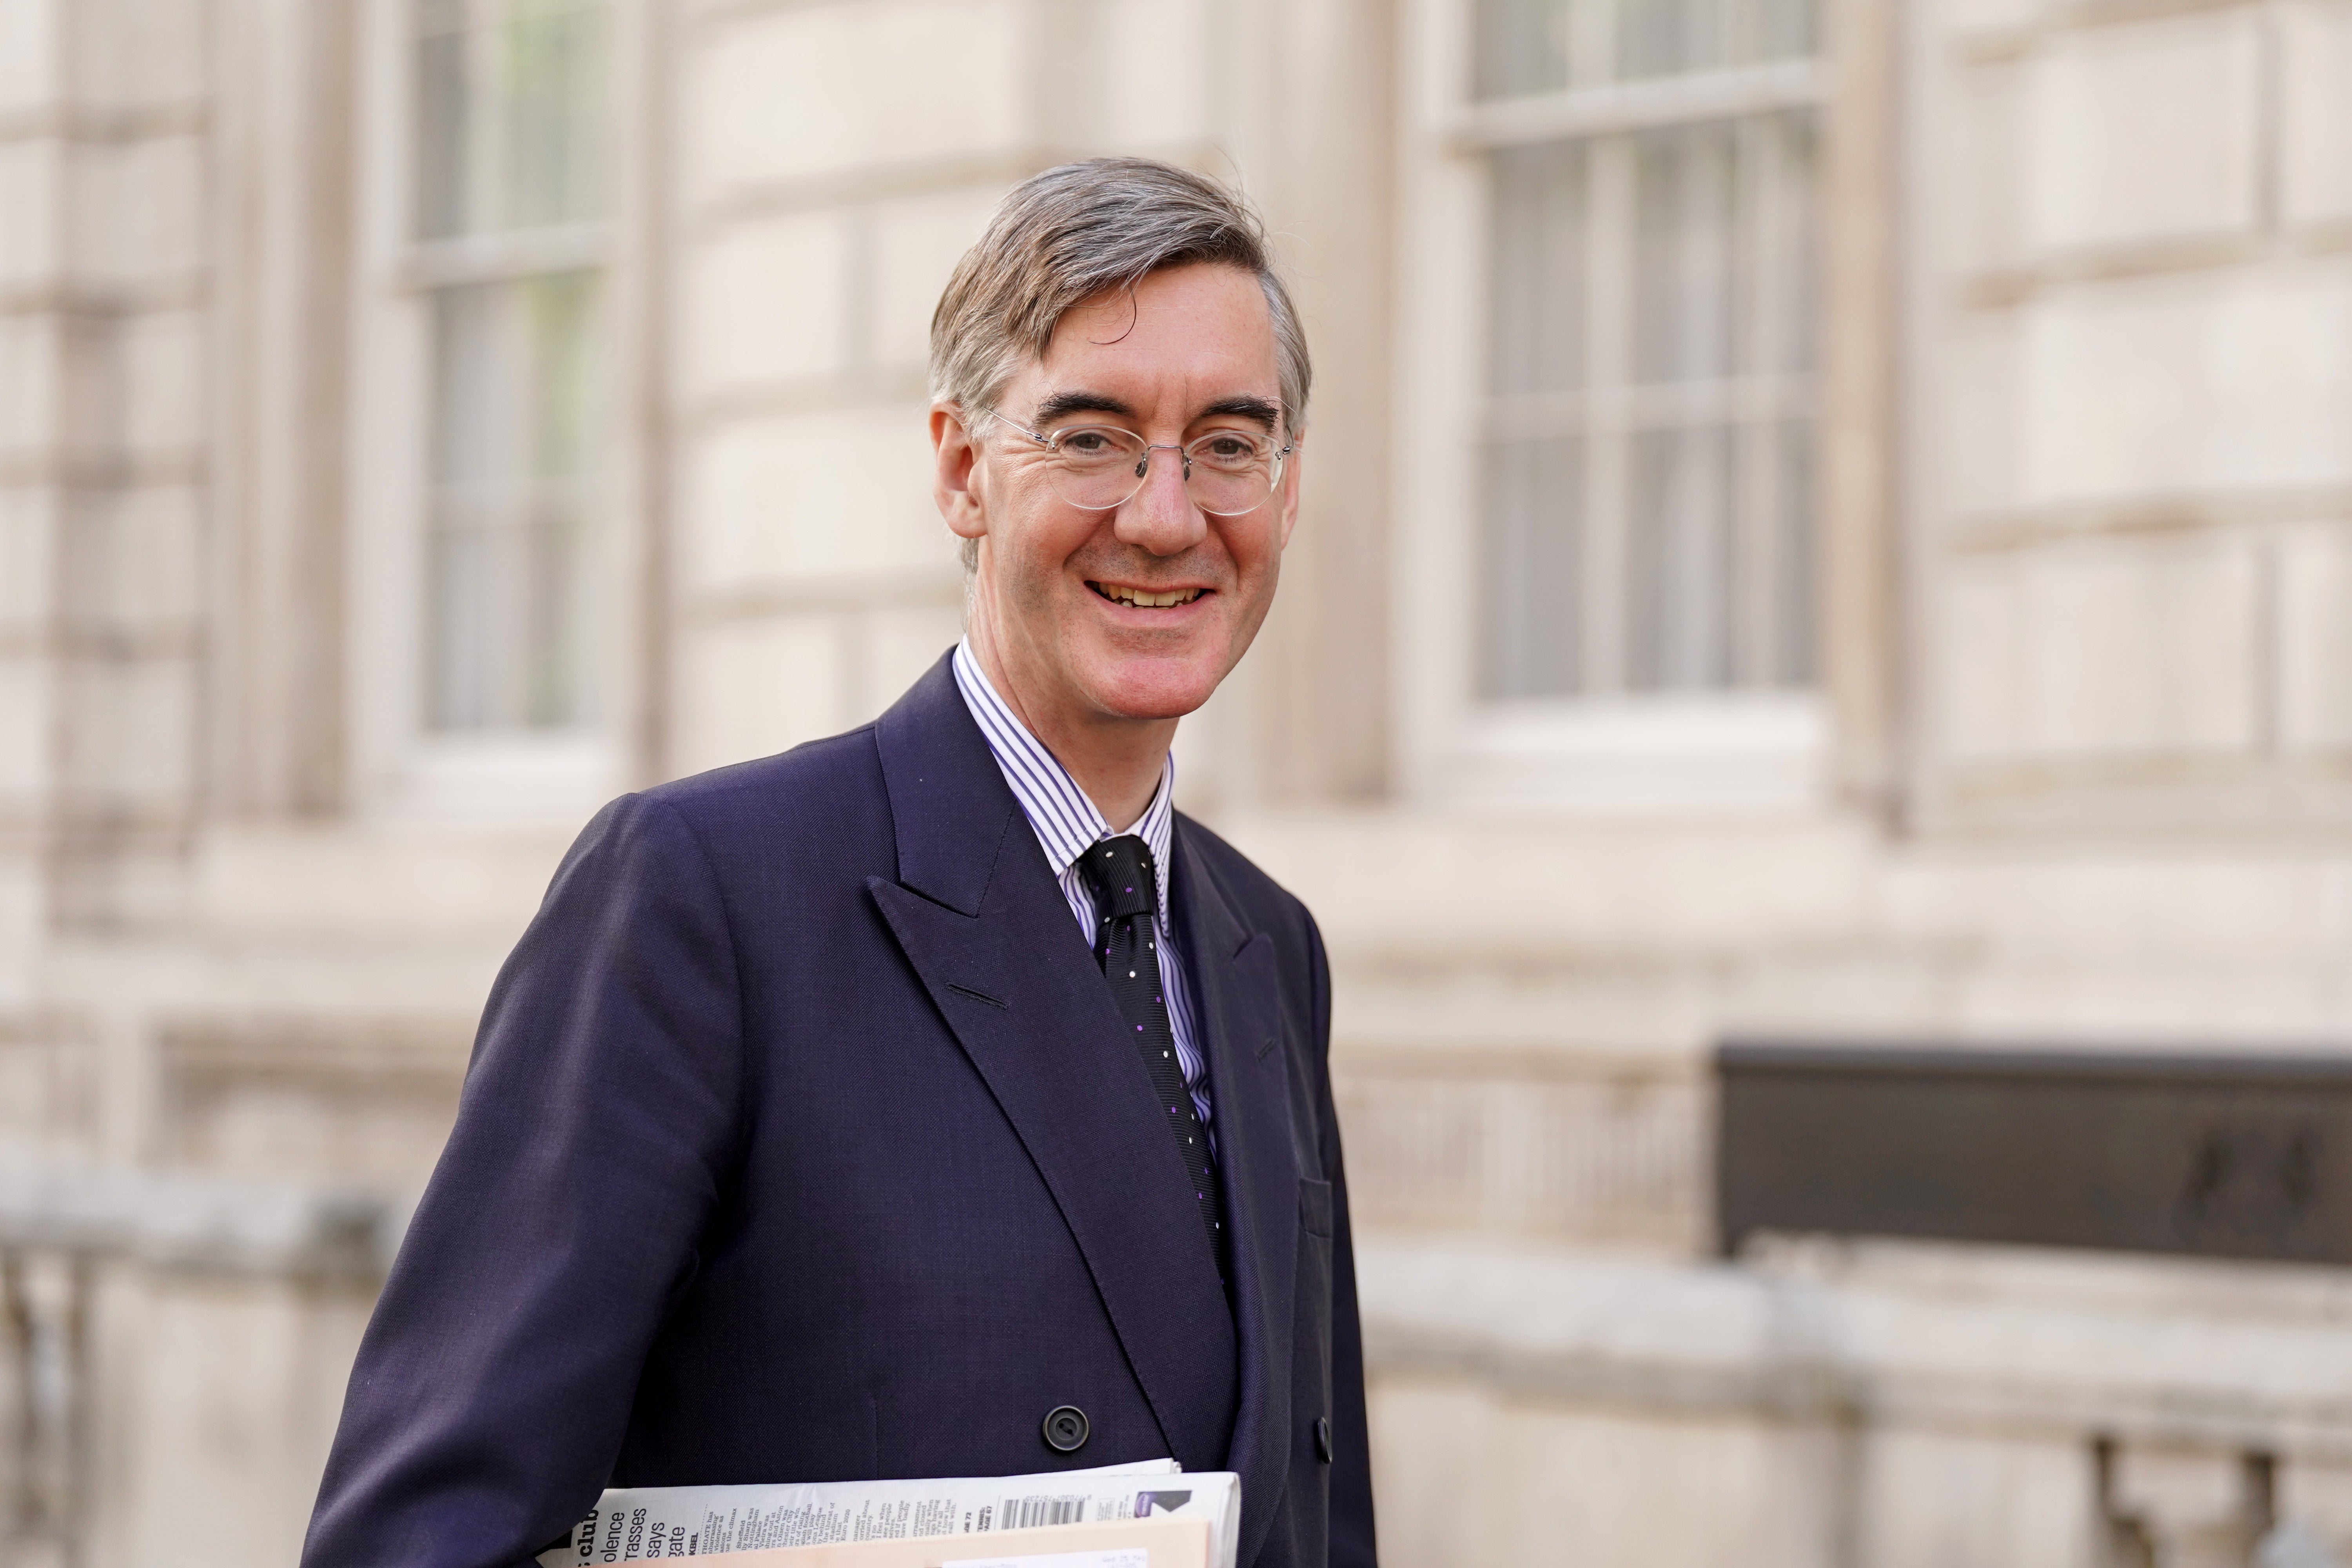 Jacob Rees-Mogg (Kirsty O’Connor/PA)